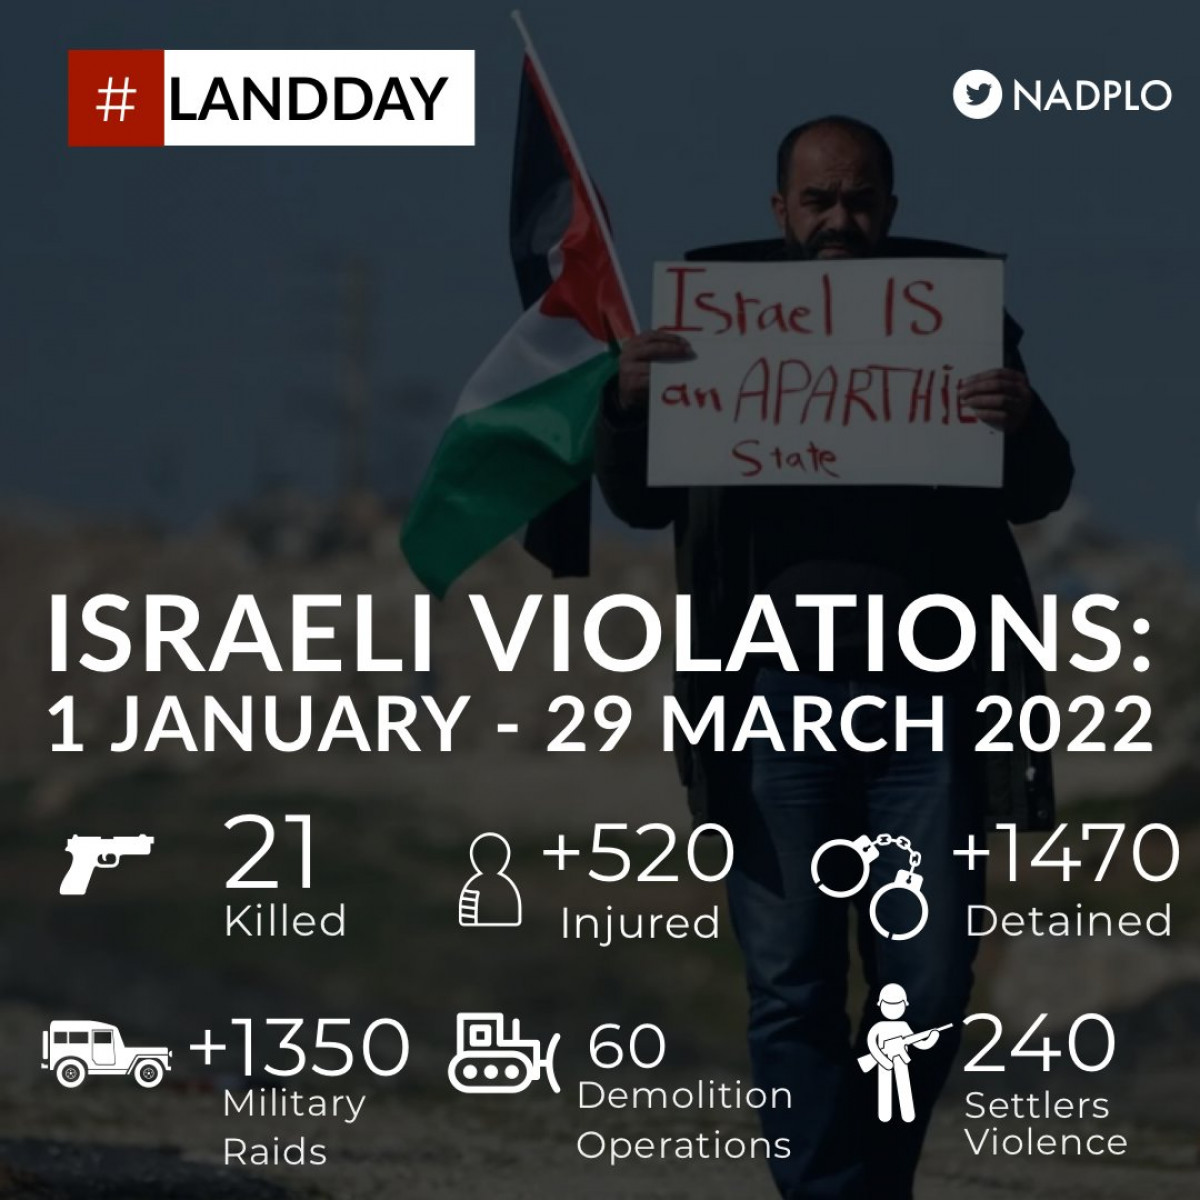 PalestineLandDay symbolizes the Palestinian people's defiance of Israel's colonial settlement project in the occupied Palestine.